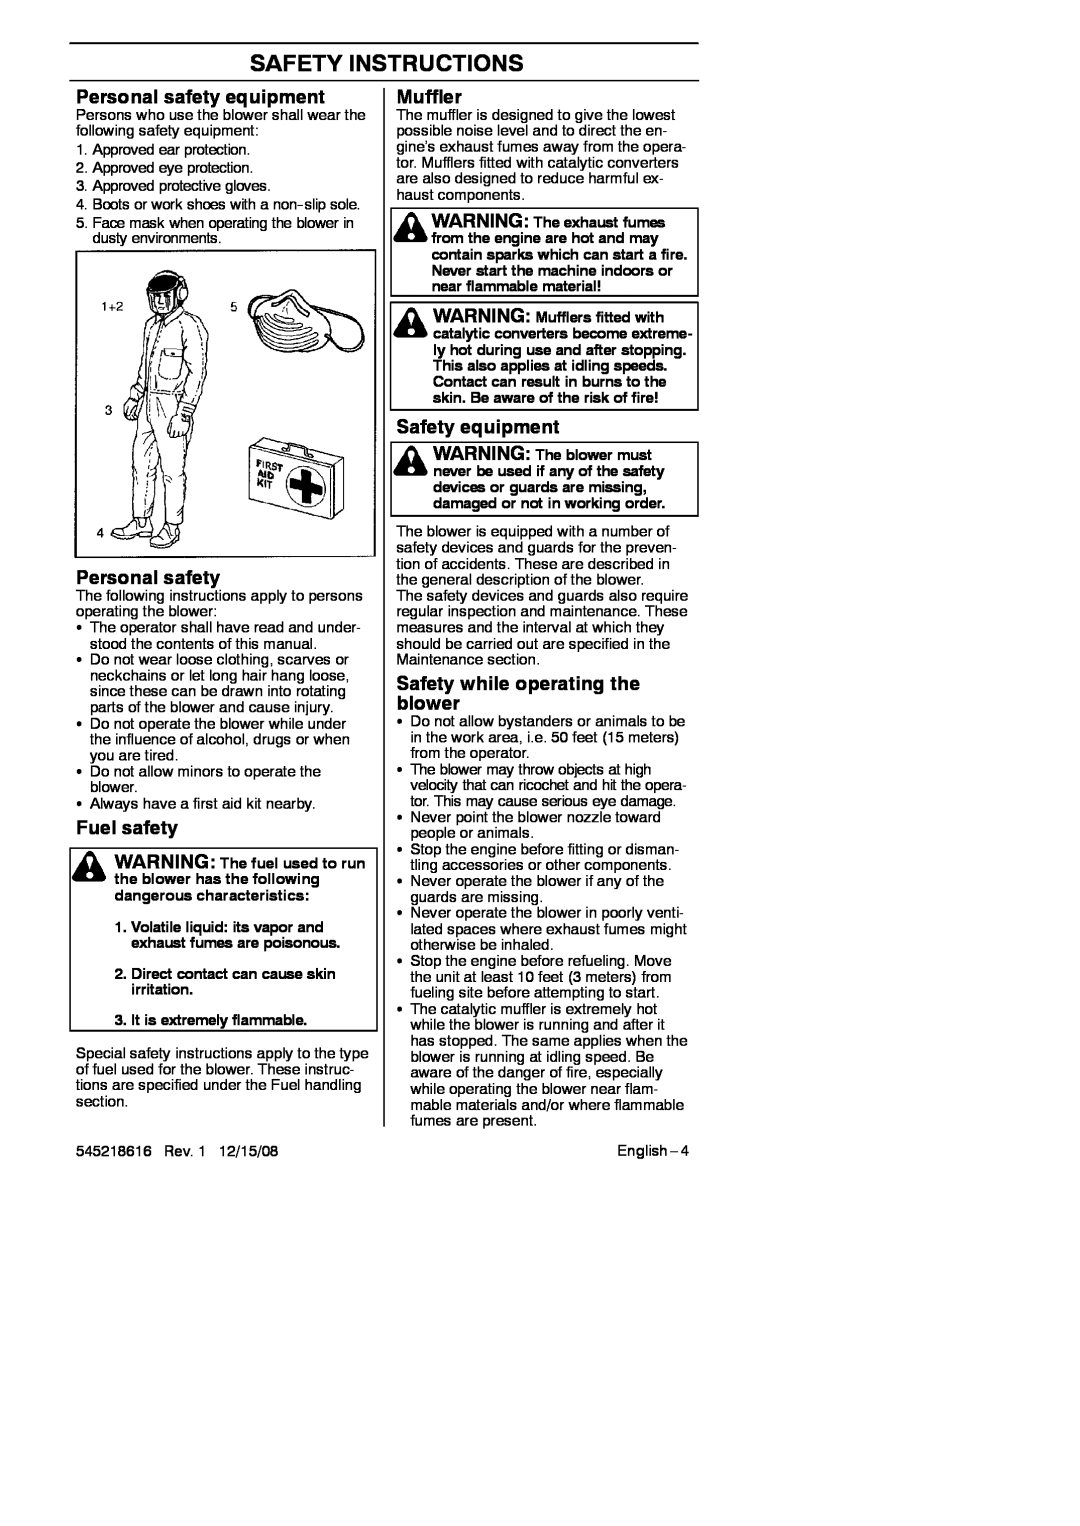 RedMax HB280 manual Safety Instructions, Personal safety equipment, Fuel safety, Muffler, Safety equipment 